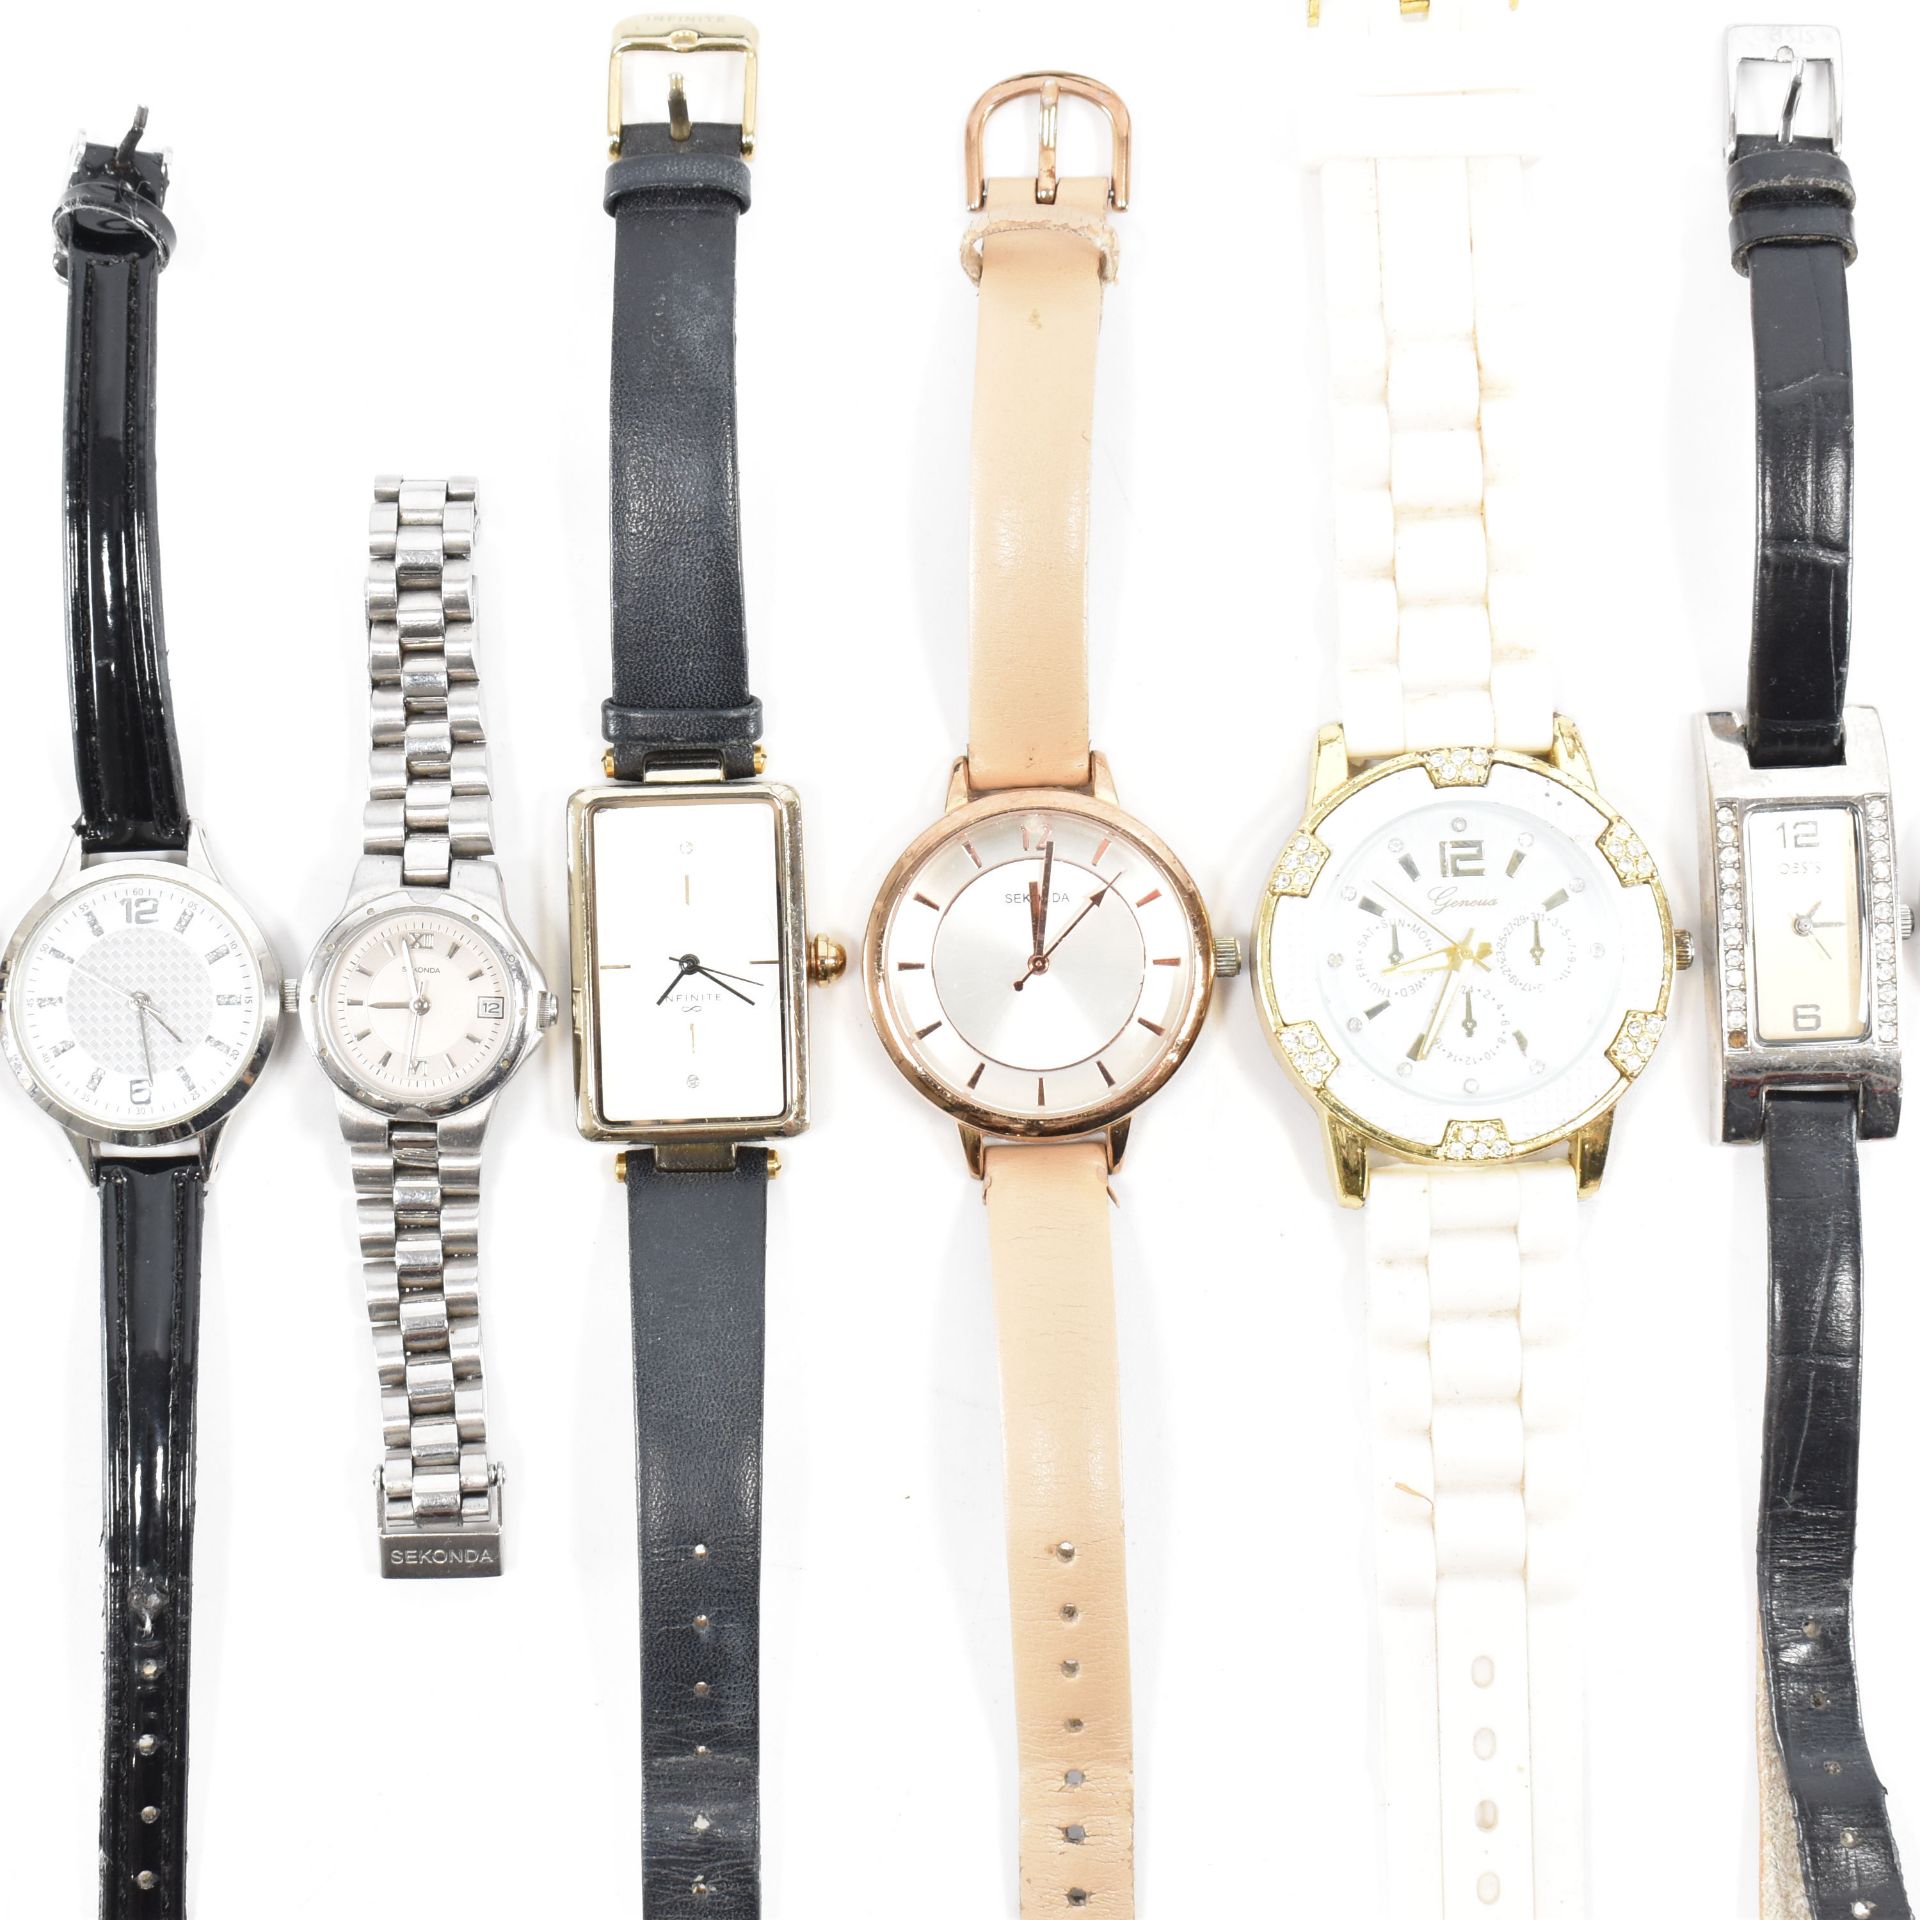 COLLECTION OF ASSORTED WRIST WATCHES